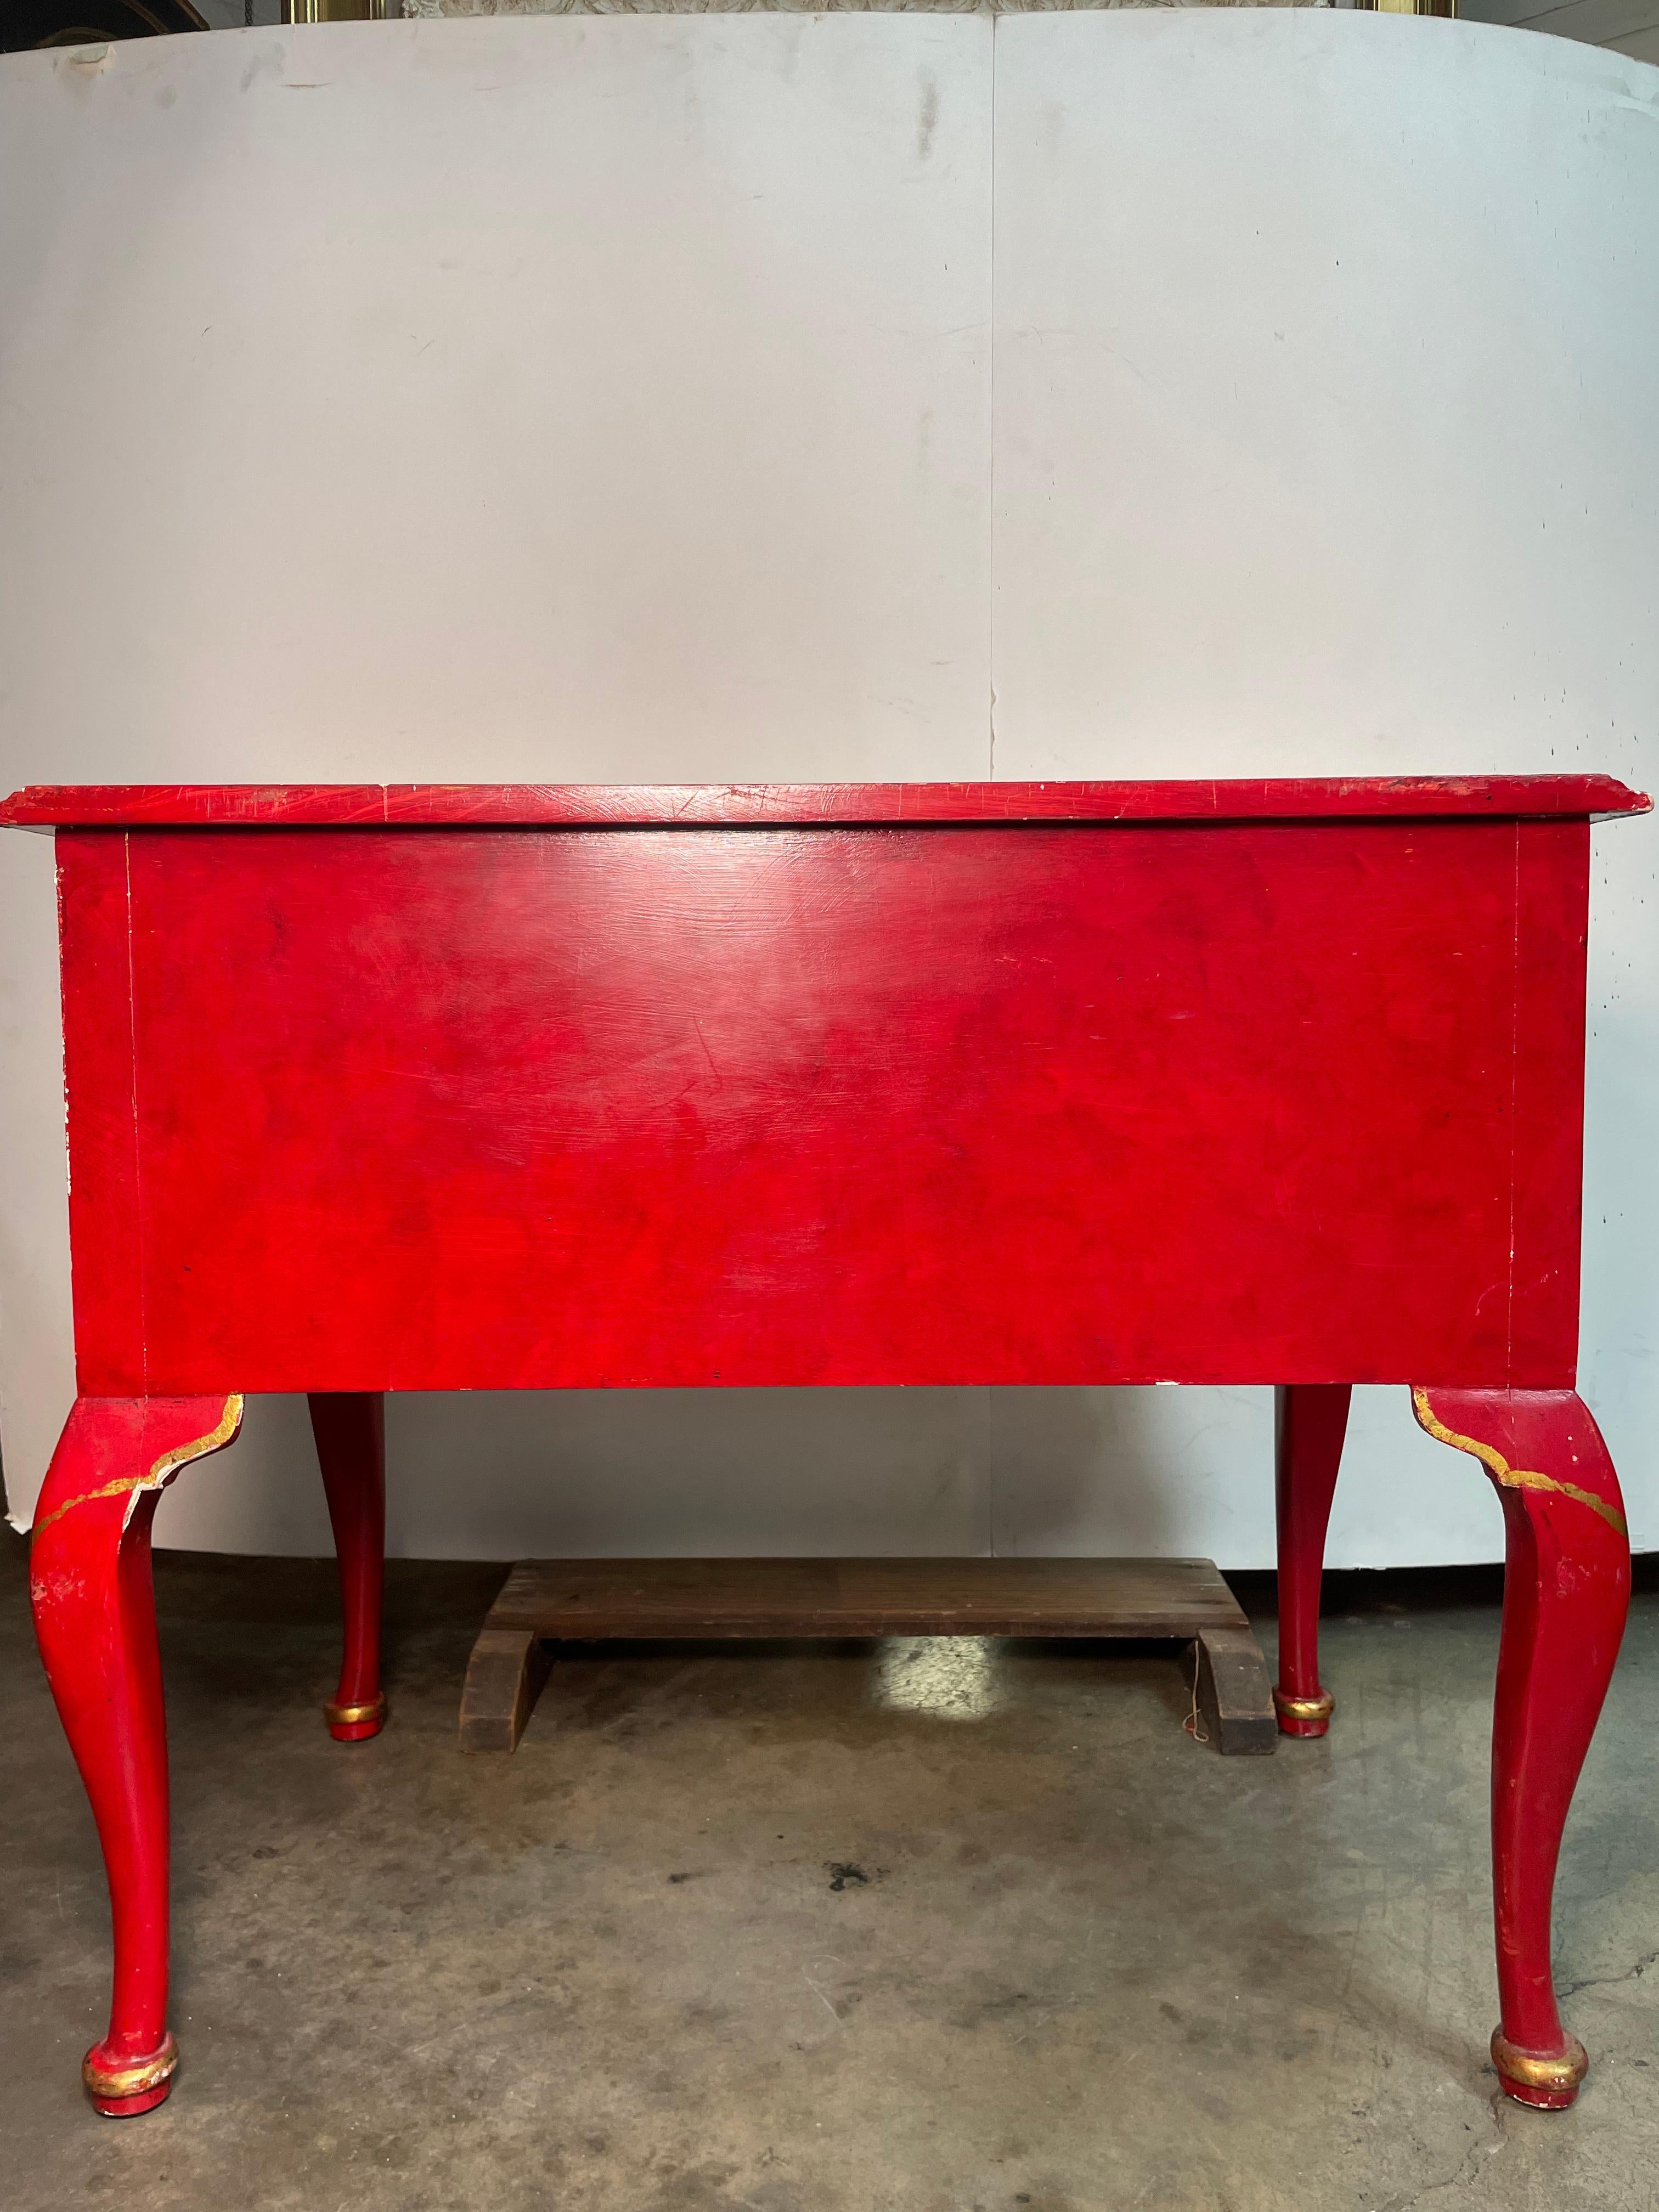 English Venezian Red Mini Kneehole Desk with raised Chinoiserie. Hand painted and crafted by Kipper himself in our shop; truly making this vibrant desk a one of a kind. He was inspired by the traditional Asian chinoiserie, and wanted to create his